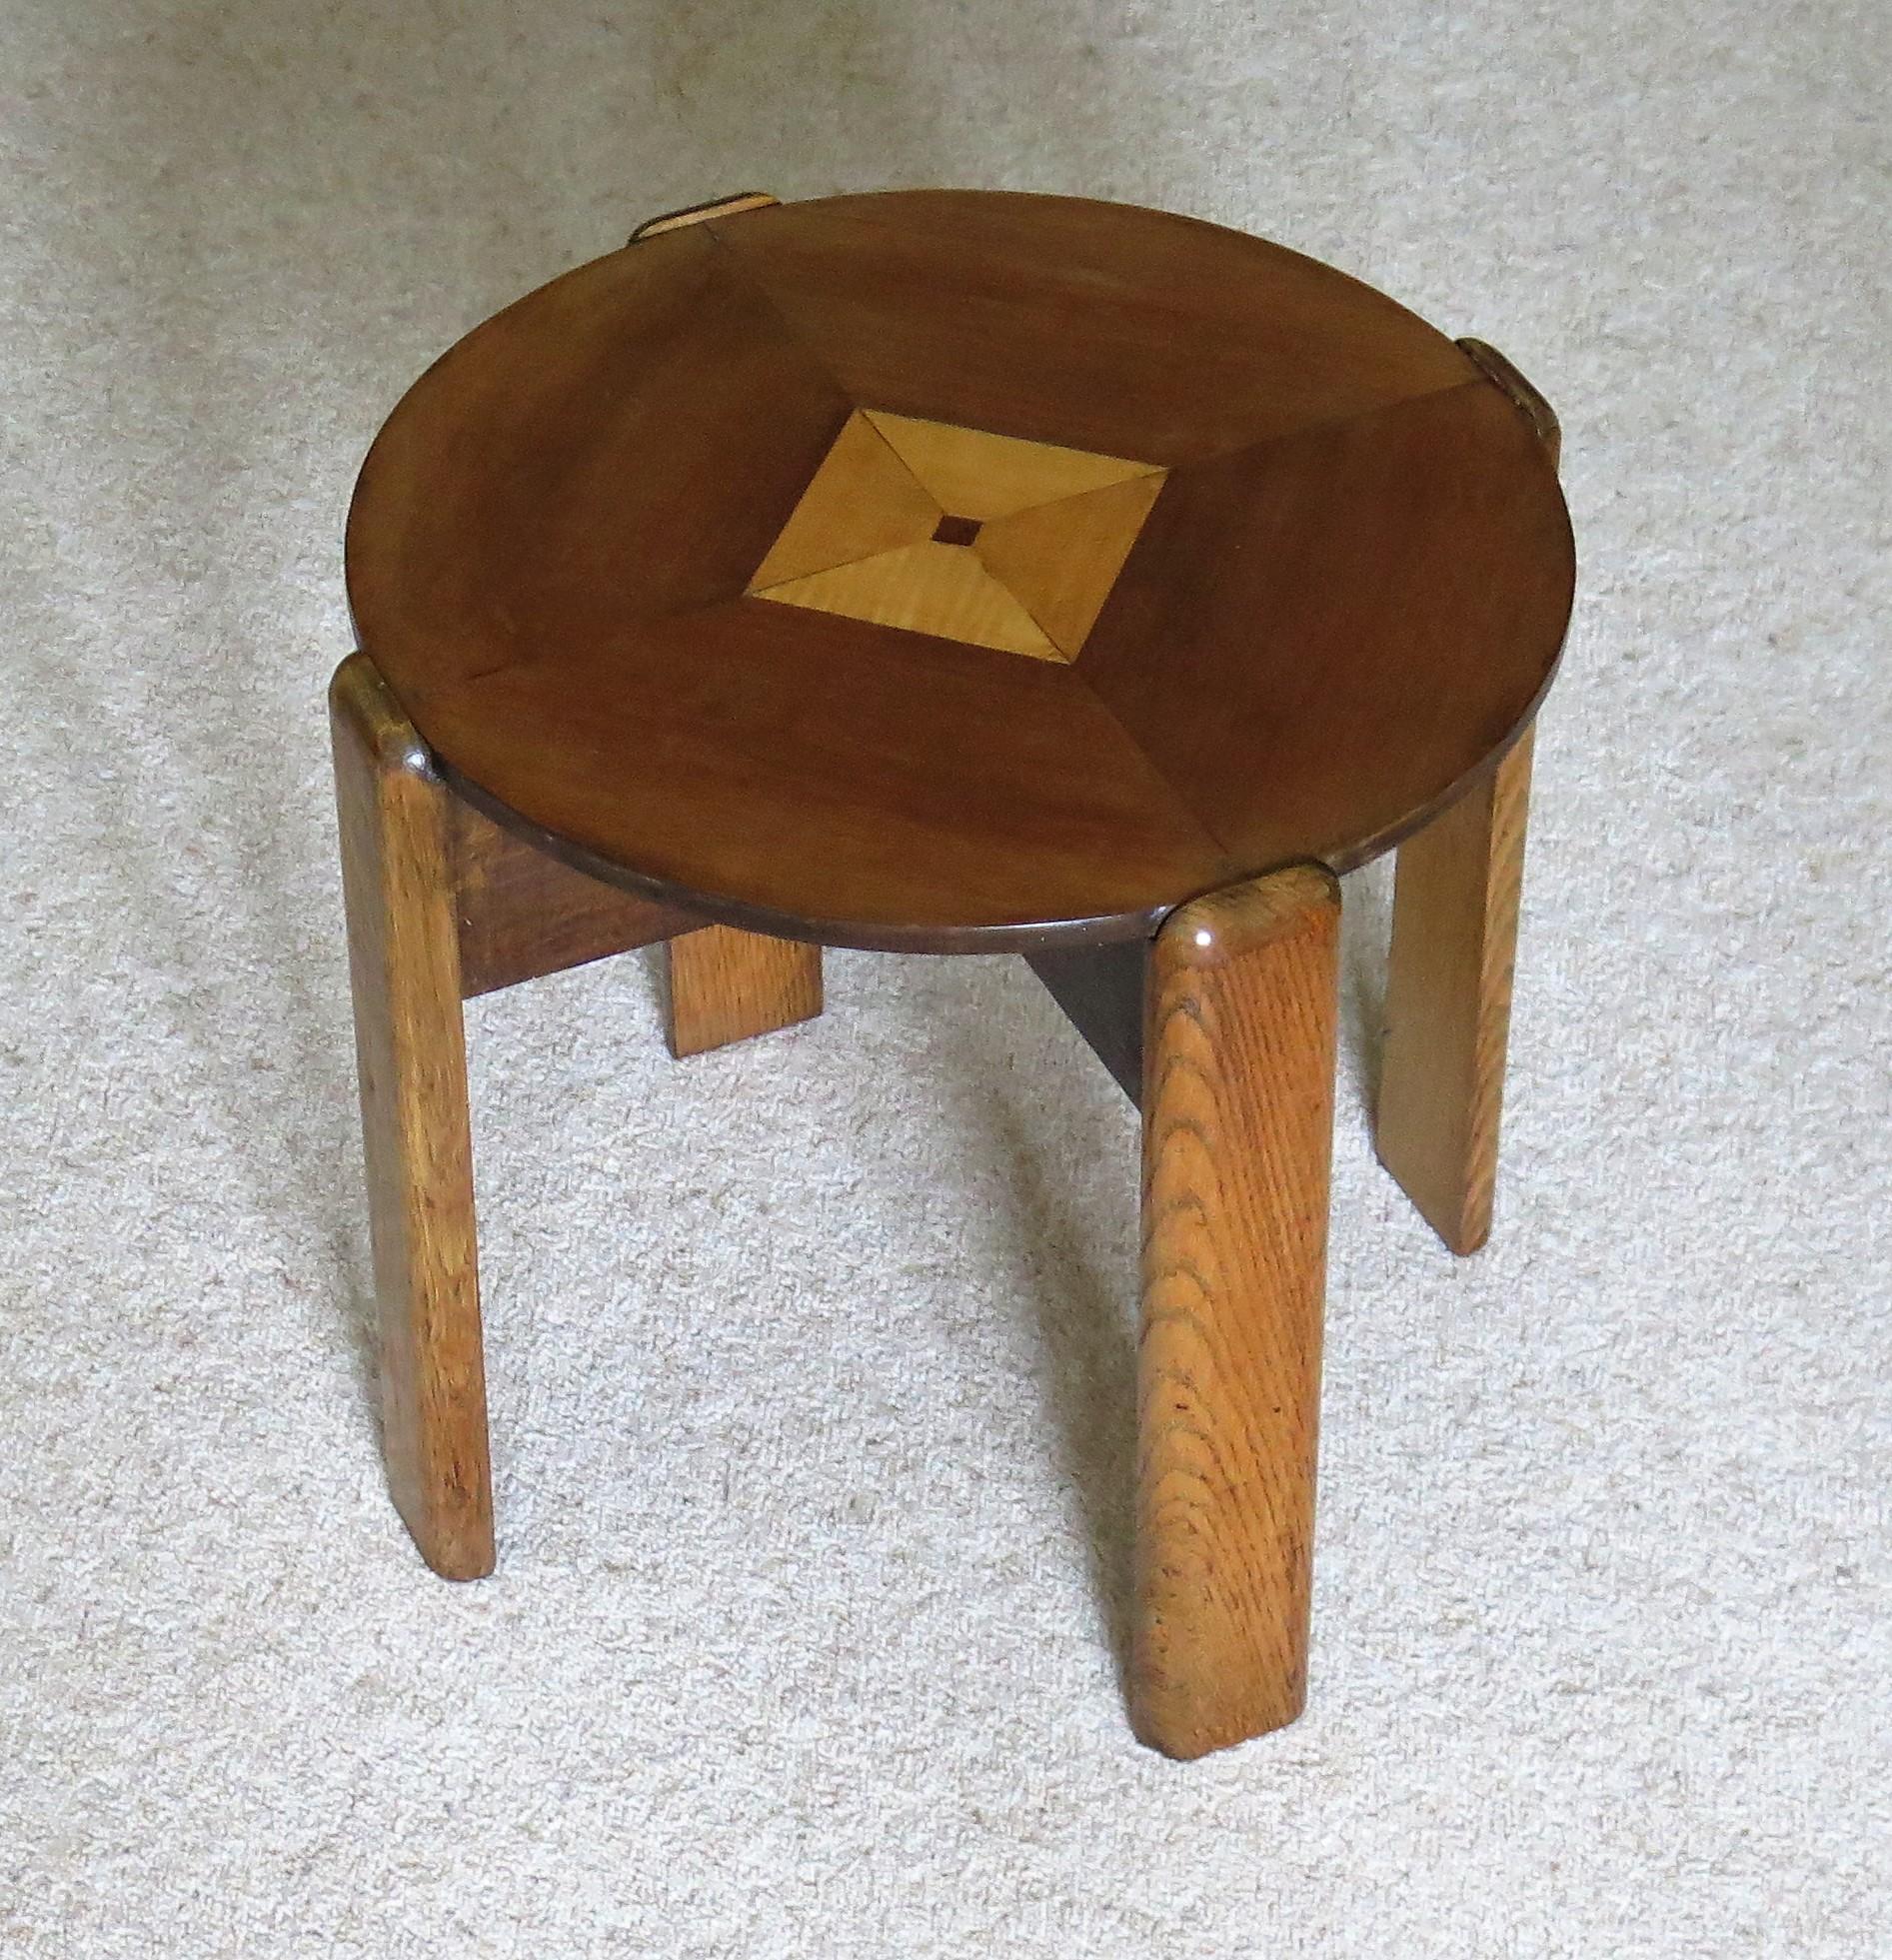 20th Century Art Deco Period Occasional Table with Quarter Veneered Top and Oak Legs, Ca 1930 For Sale